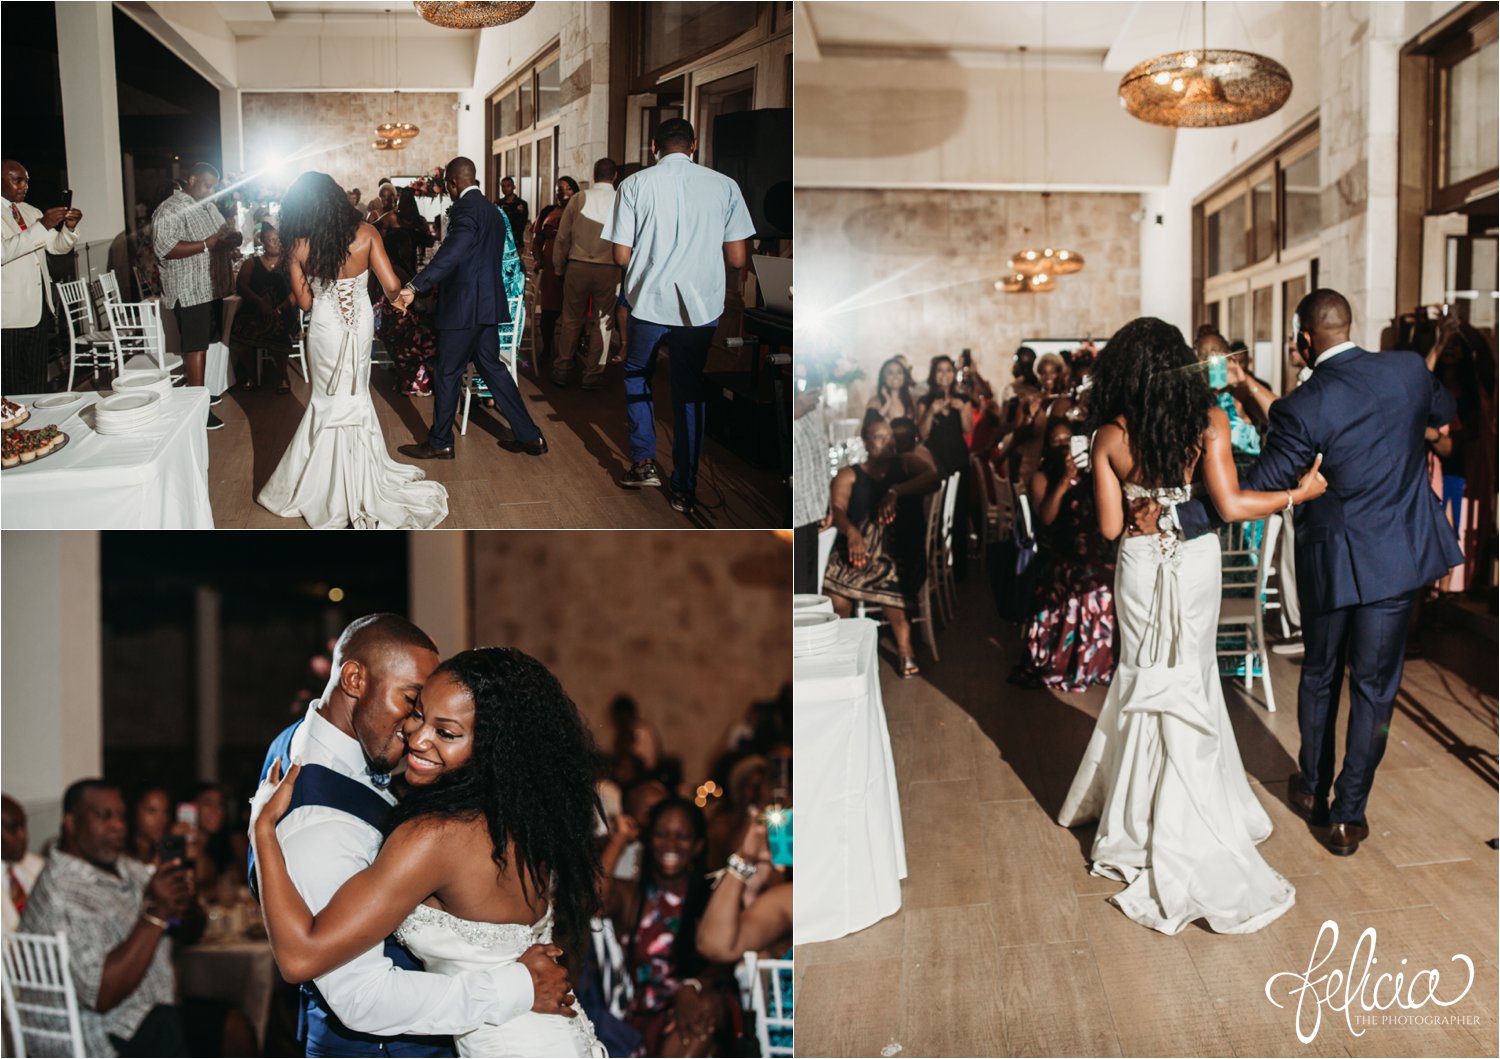   images by feliciathephotographer.com | destination wedding photographer | st lucia | l&s travel | the Royalton | reception | grand entrance | bride and groom | glamorous | details | first dance | white gown | lace up back | kleinfeld | navy suit | 